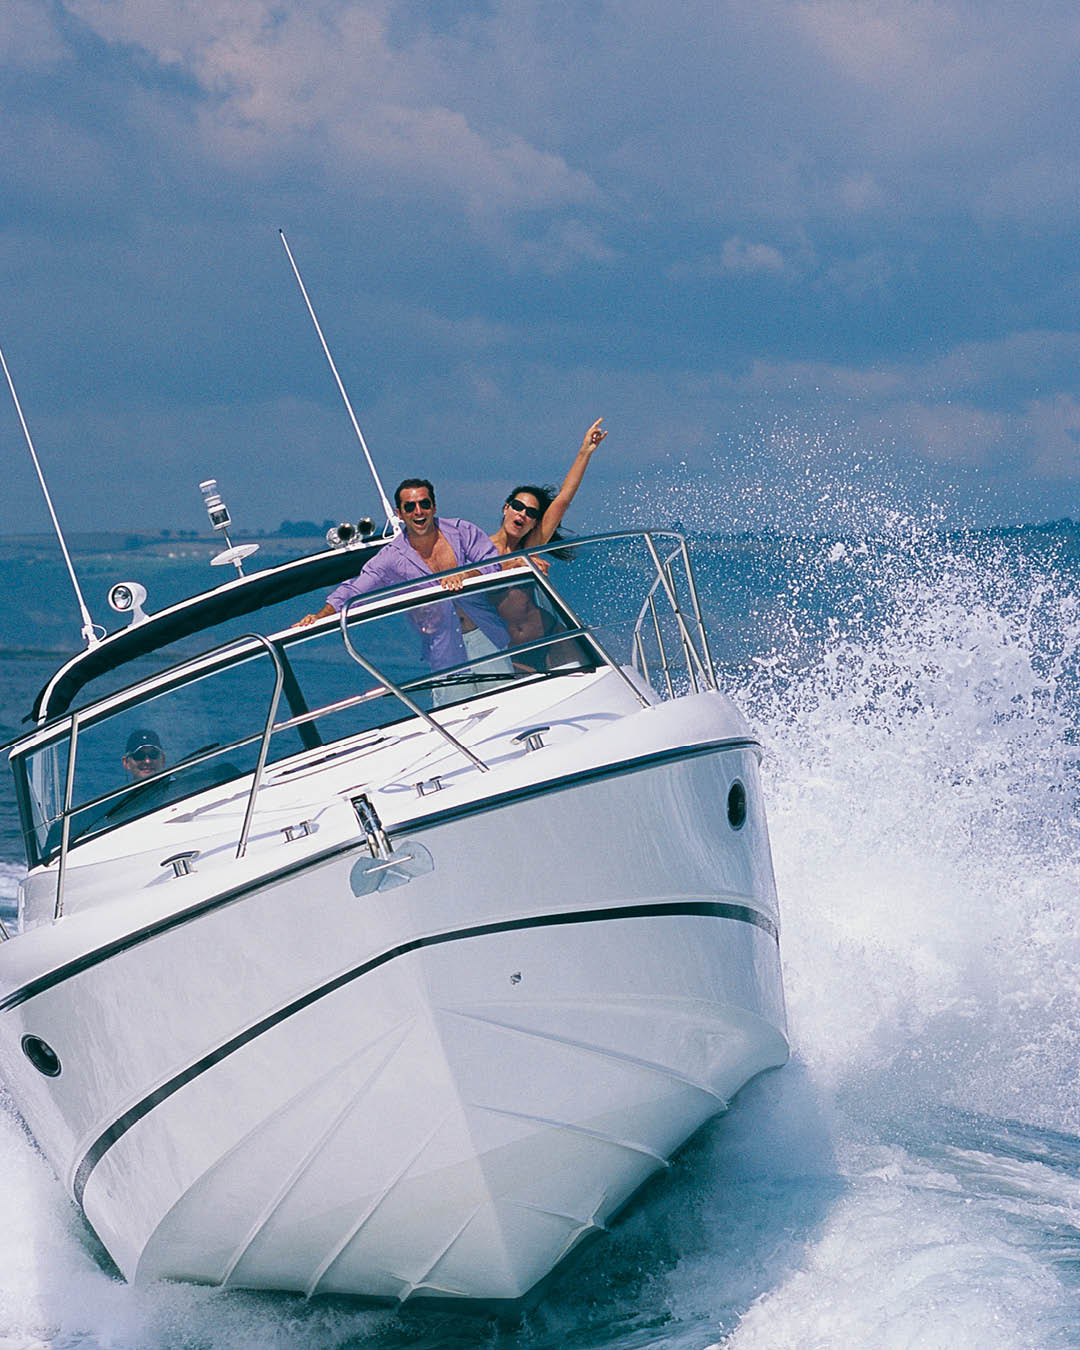 A couple on board a Princess V42 at high speed on the water, the woman is punching her fist in the air with joy